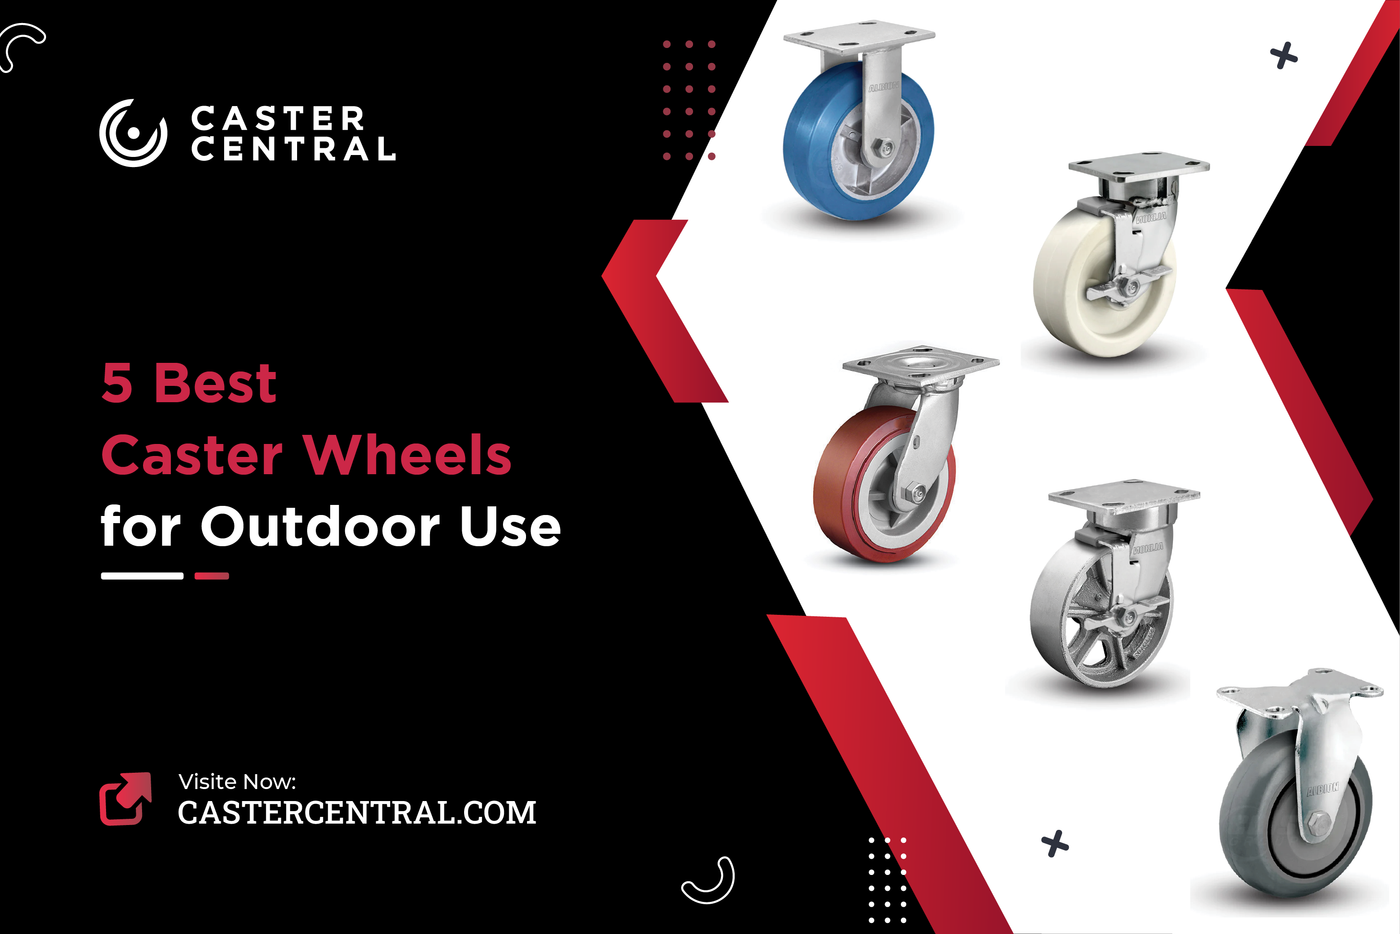 5 Best Caster Wheels for Outdoor Use